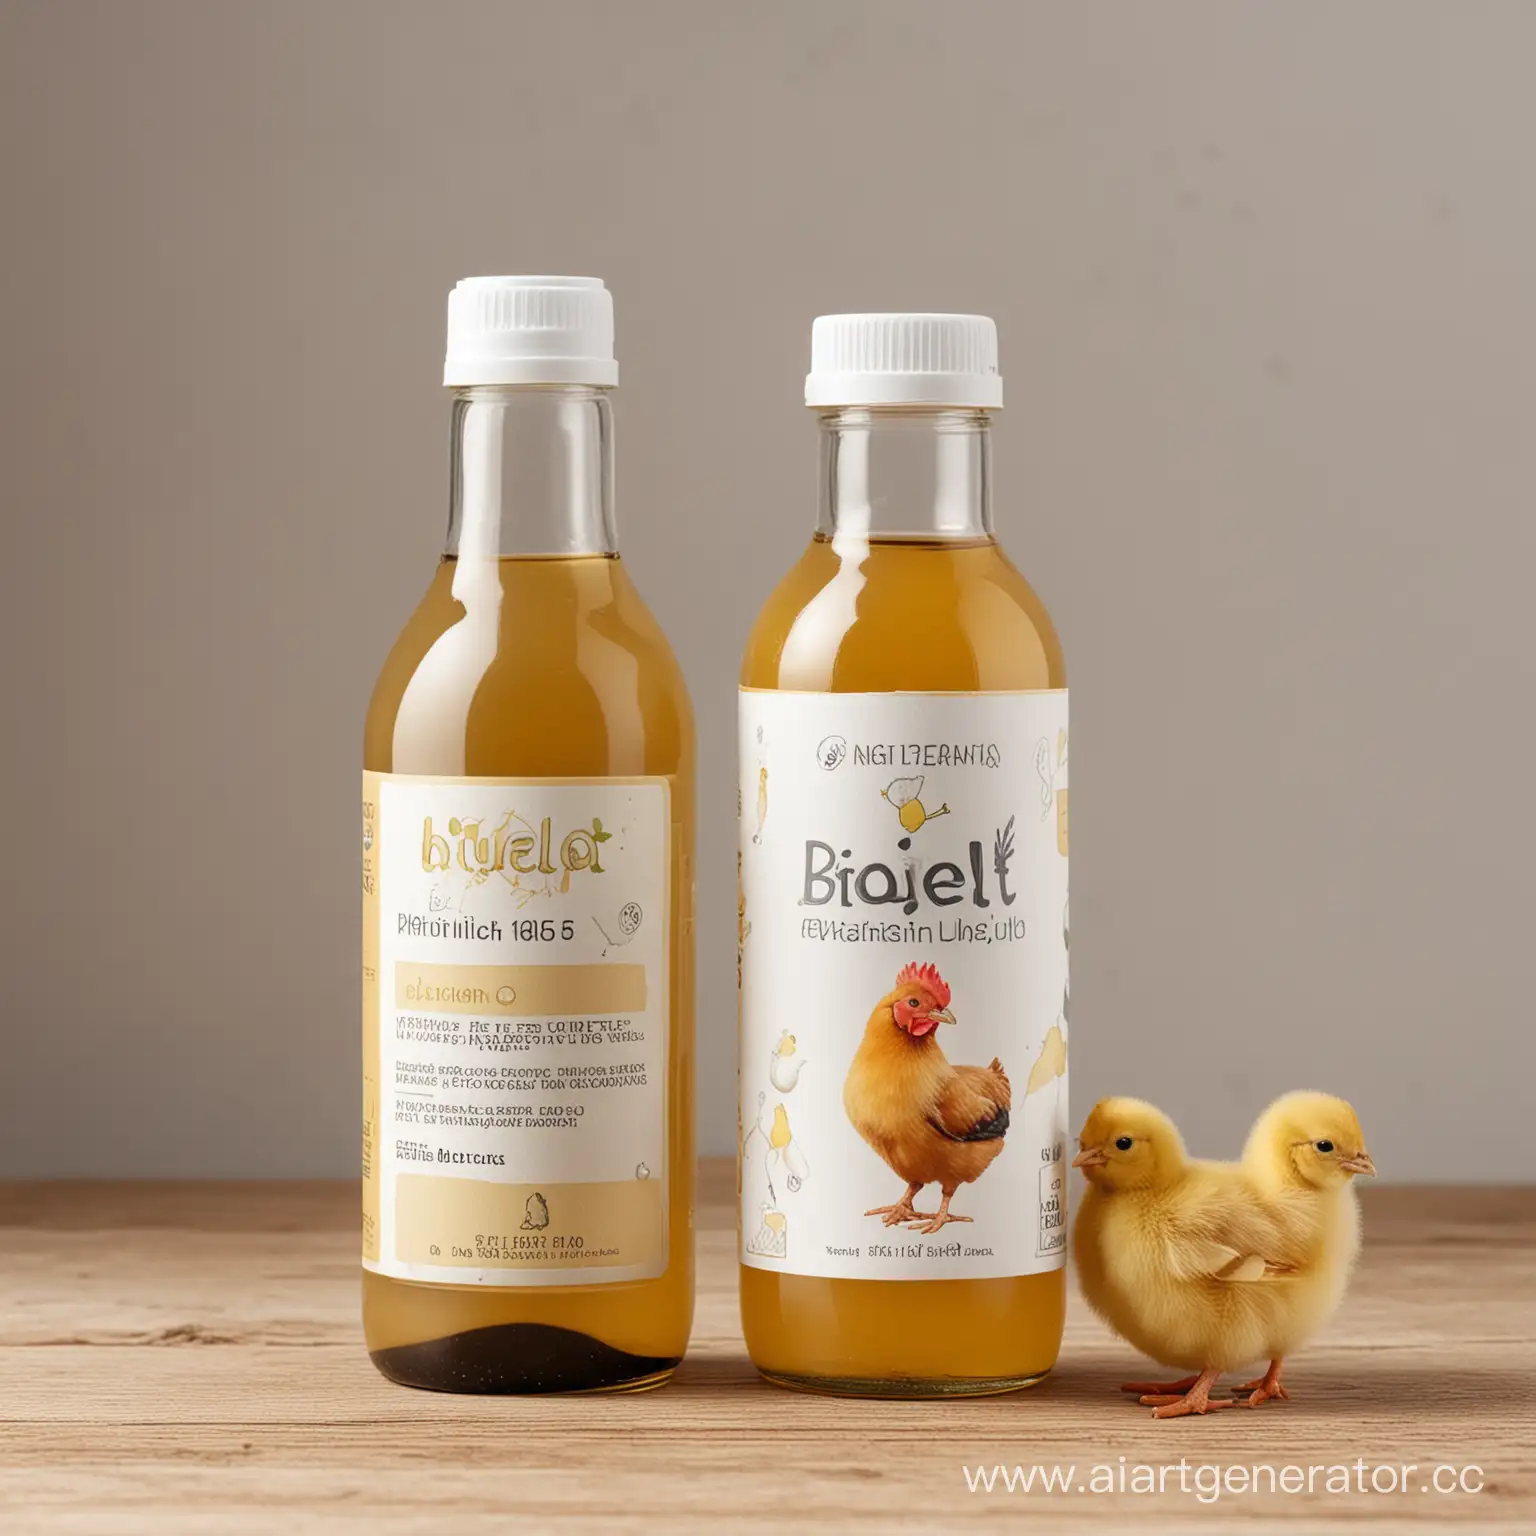 Biolet-Probiotic-Liquid-for-Birds-with-Chicken-and-Chick-Illustration